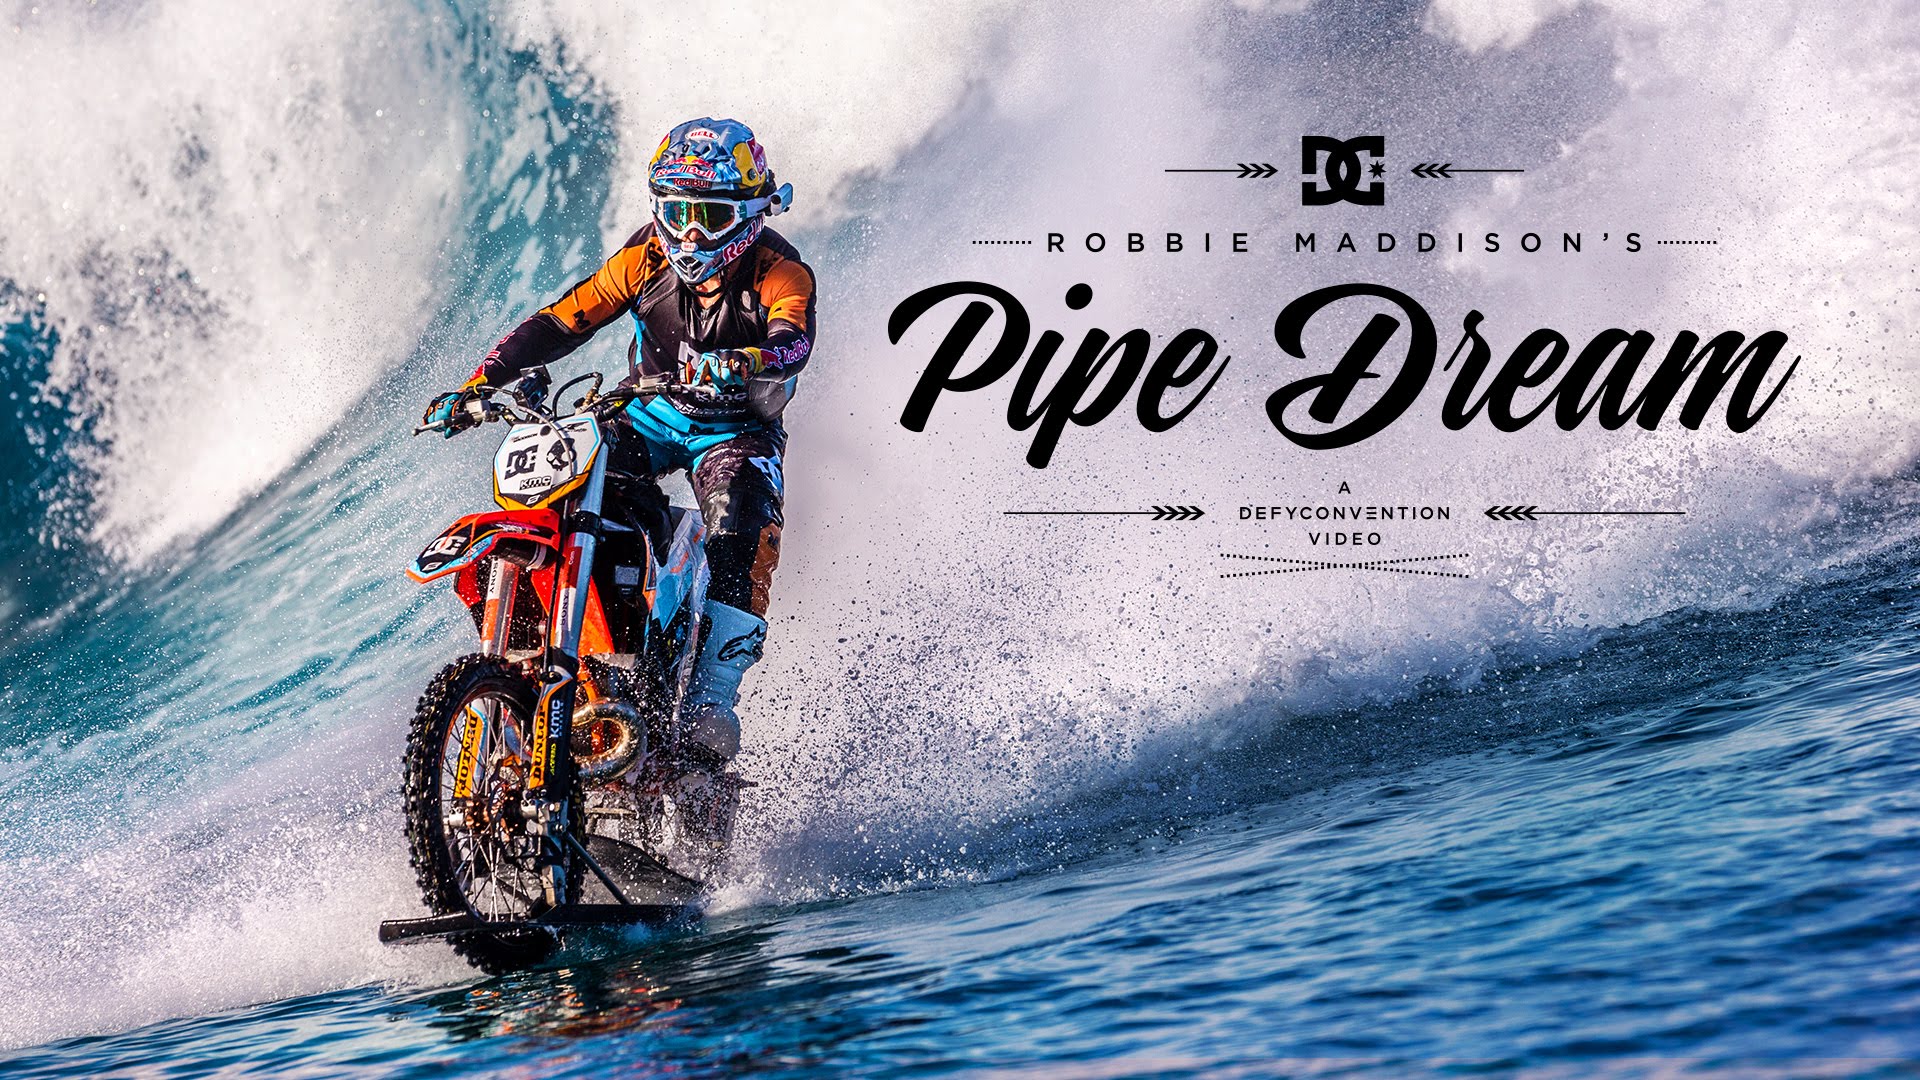 DC SHOES ROBBIE MADDISON'S 